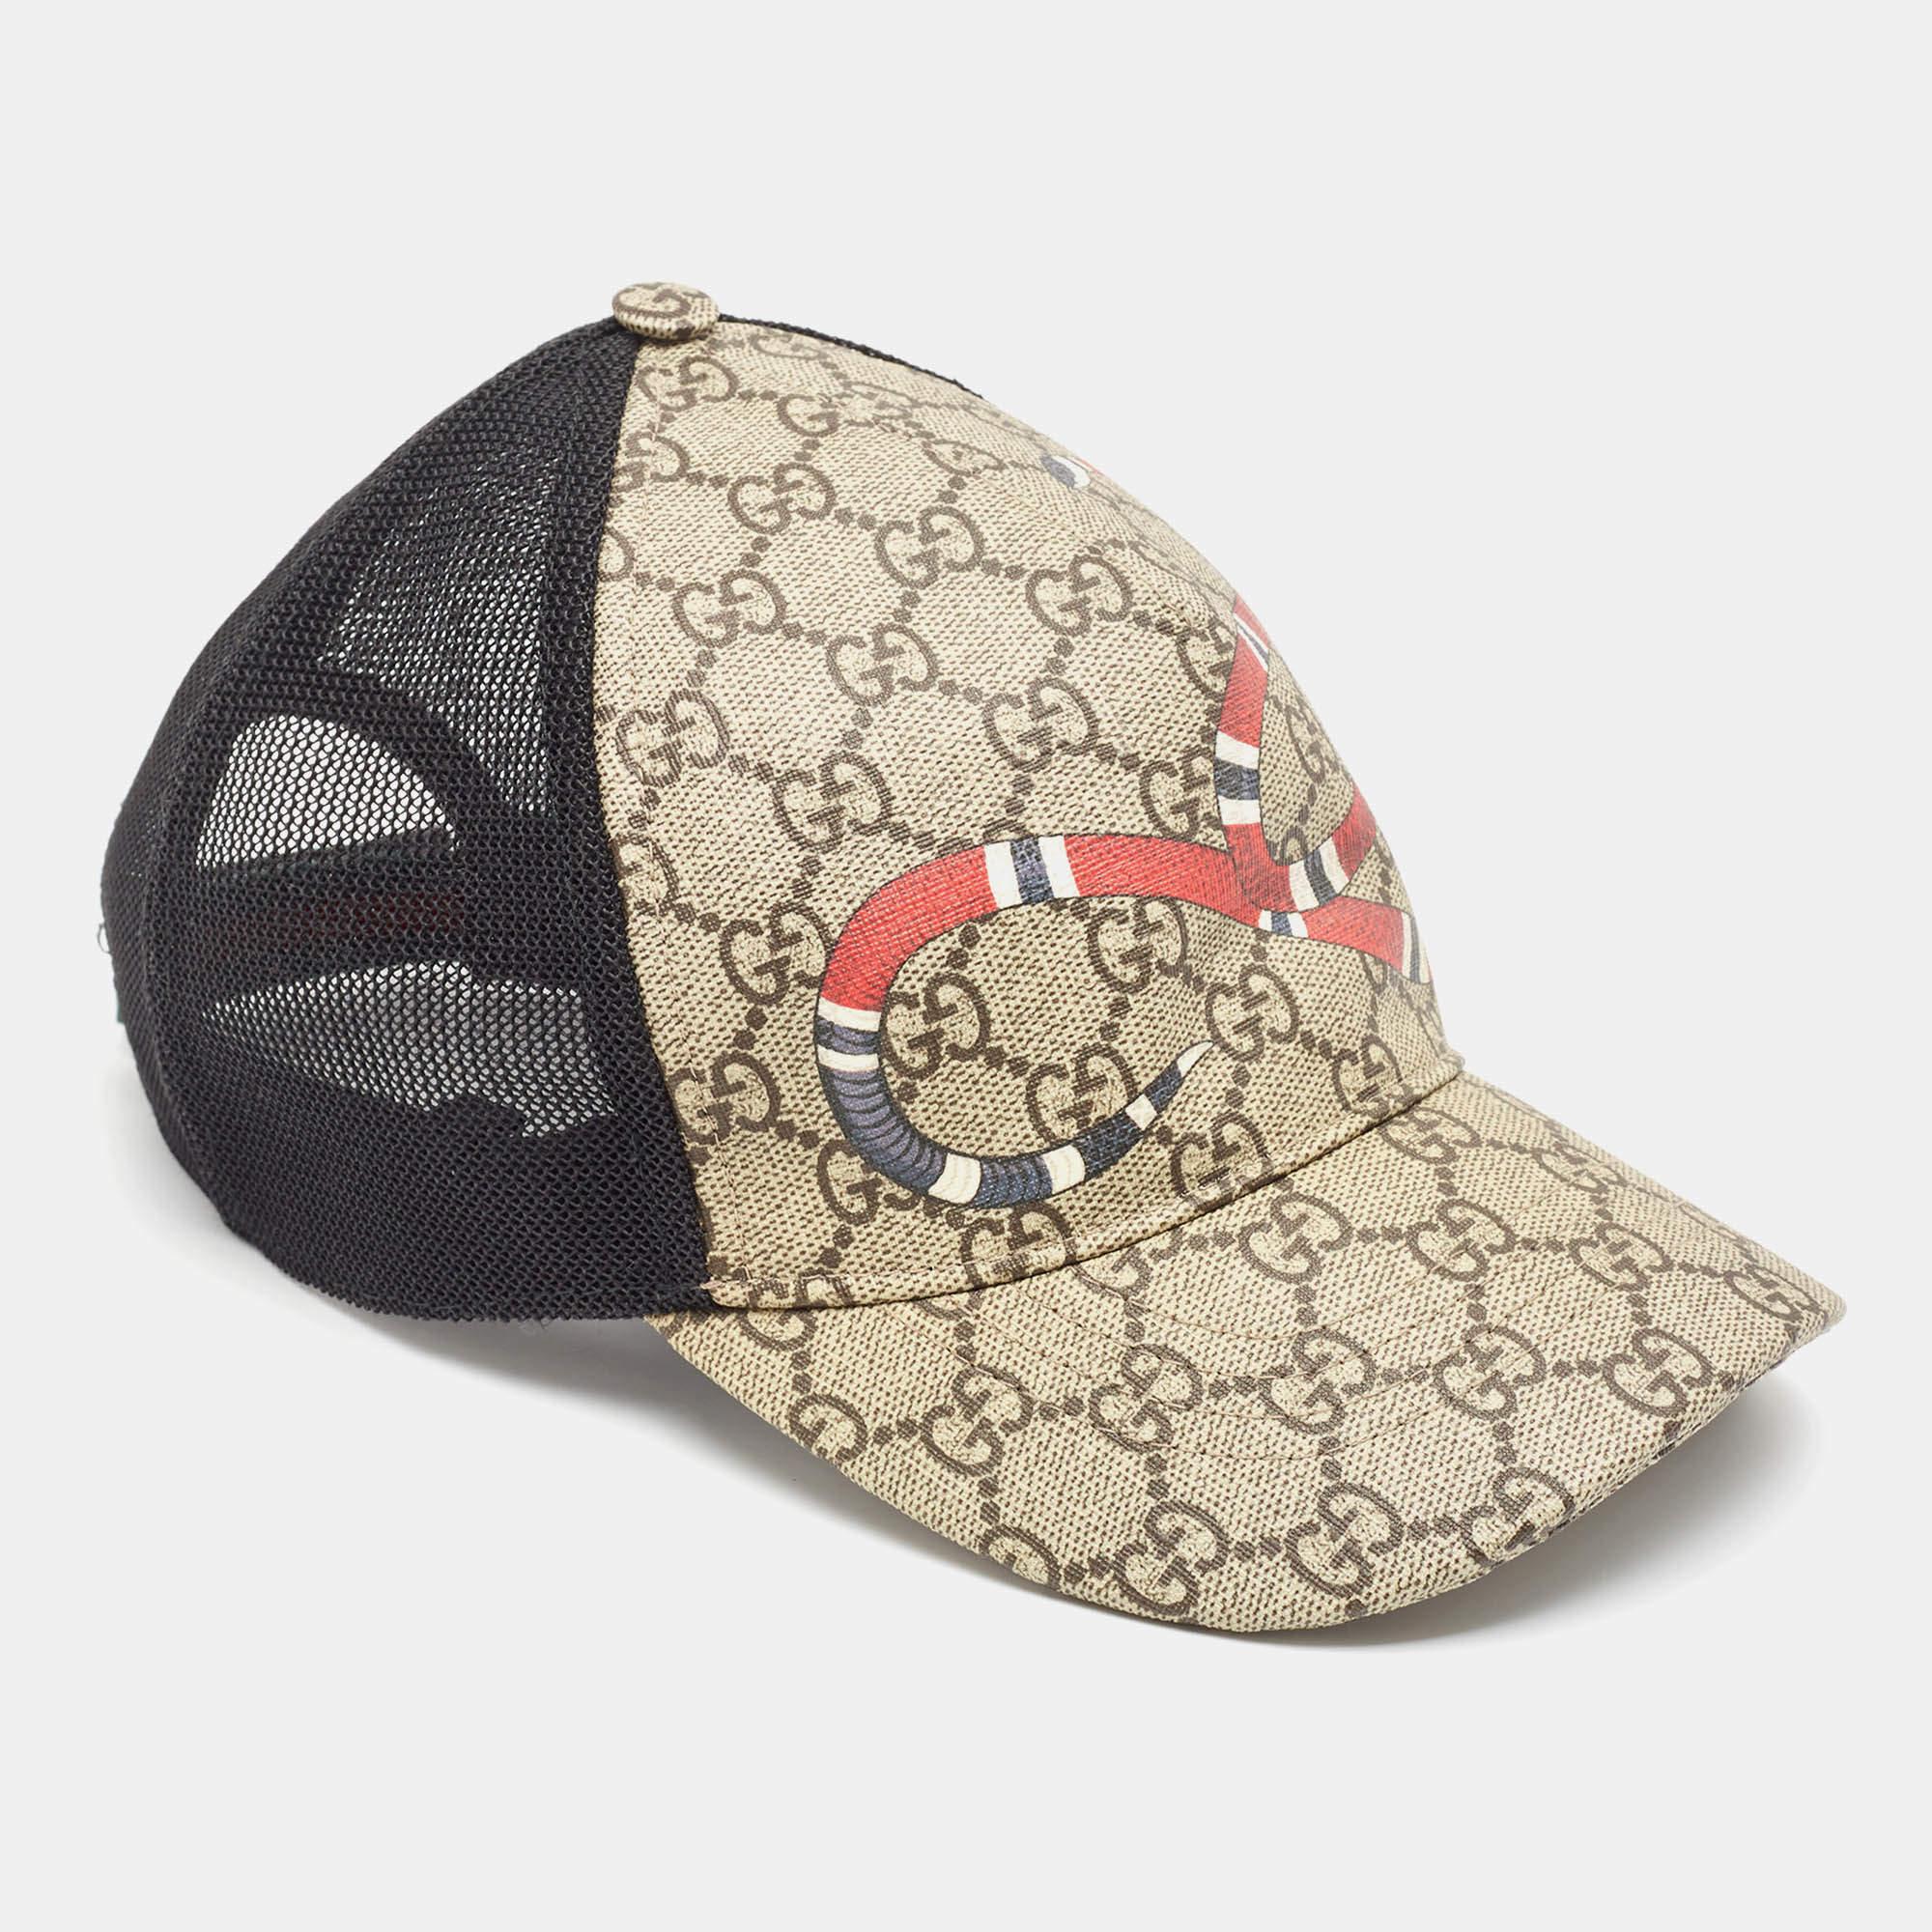 Baseball caps are perfect for sunny days, game days, or just to complete a casual outfit. This Gucci piece is made from GG Supreme canvas as well as mesh and has the Kingsnake detail.

